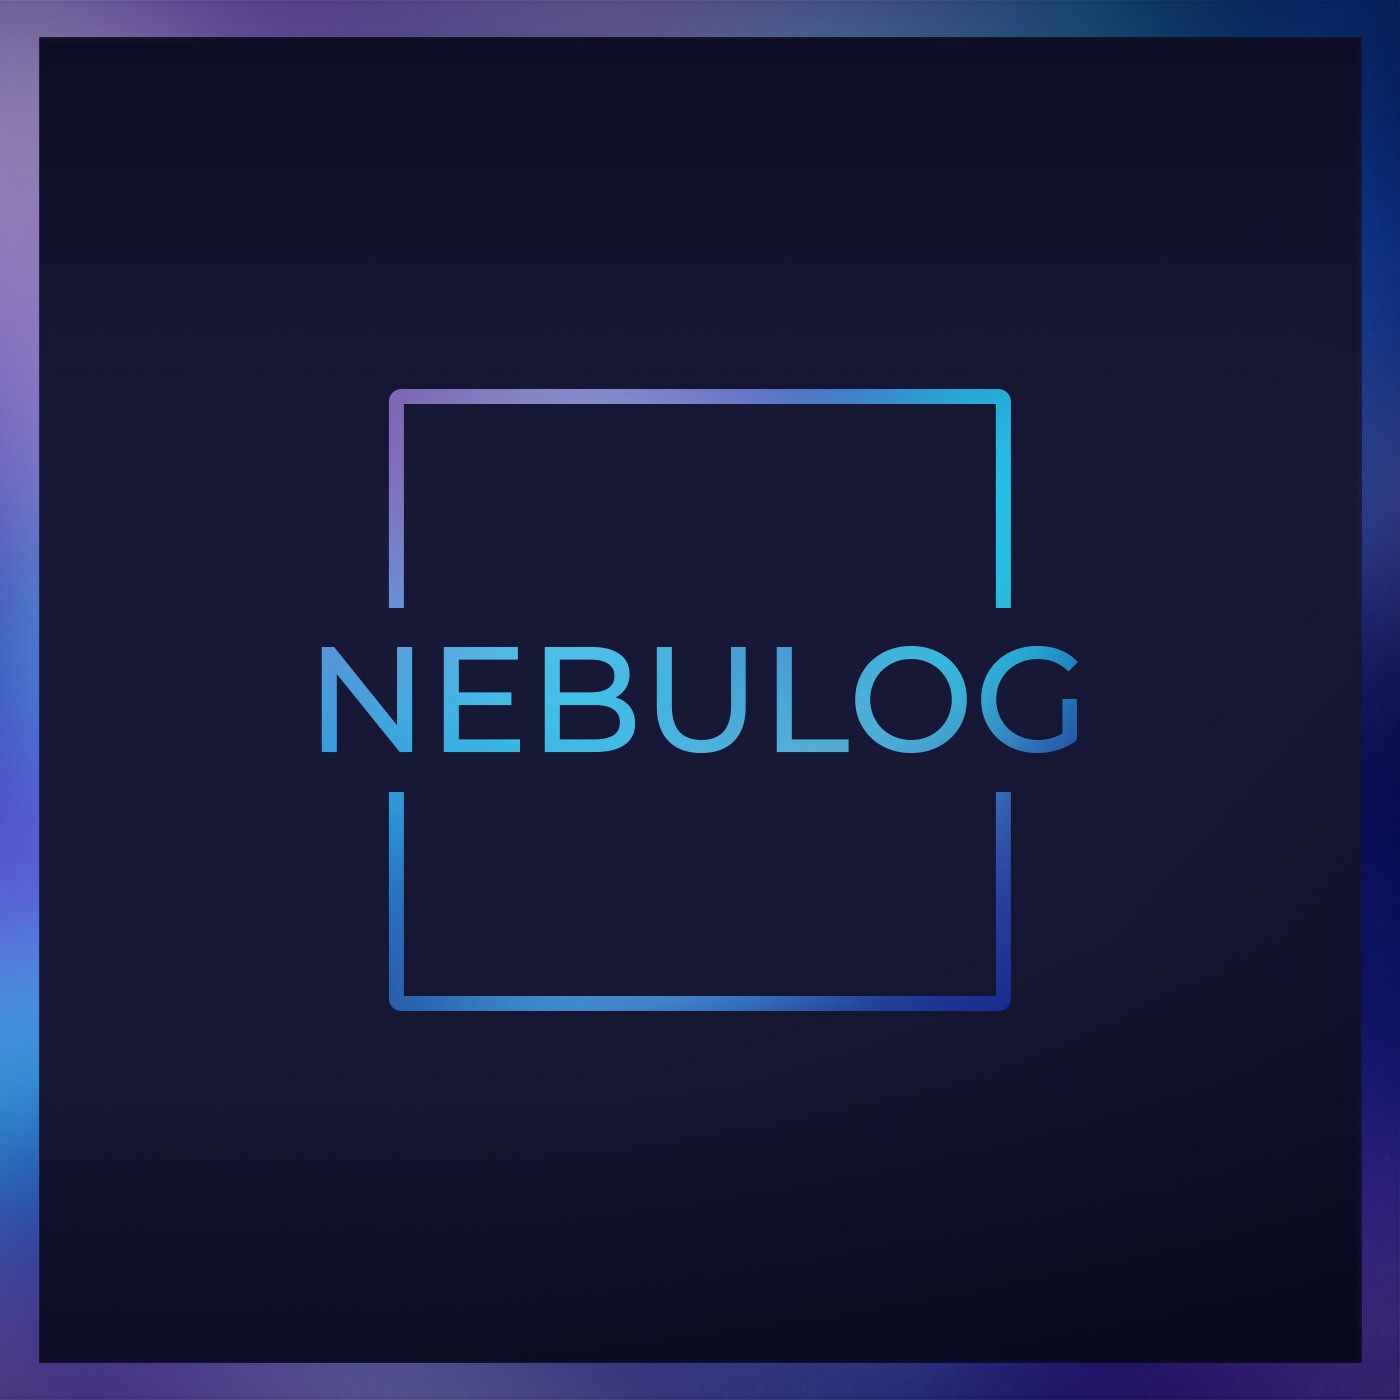 EP 1: Welcome to the Nebulos Entertainment Podcast